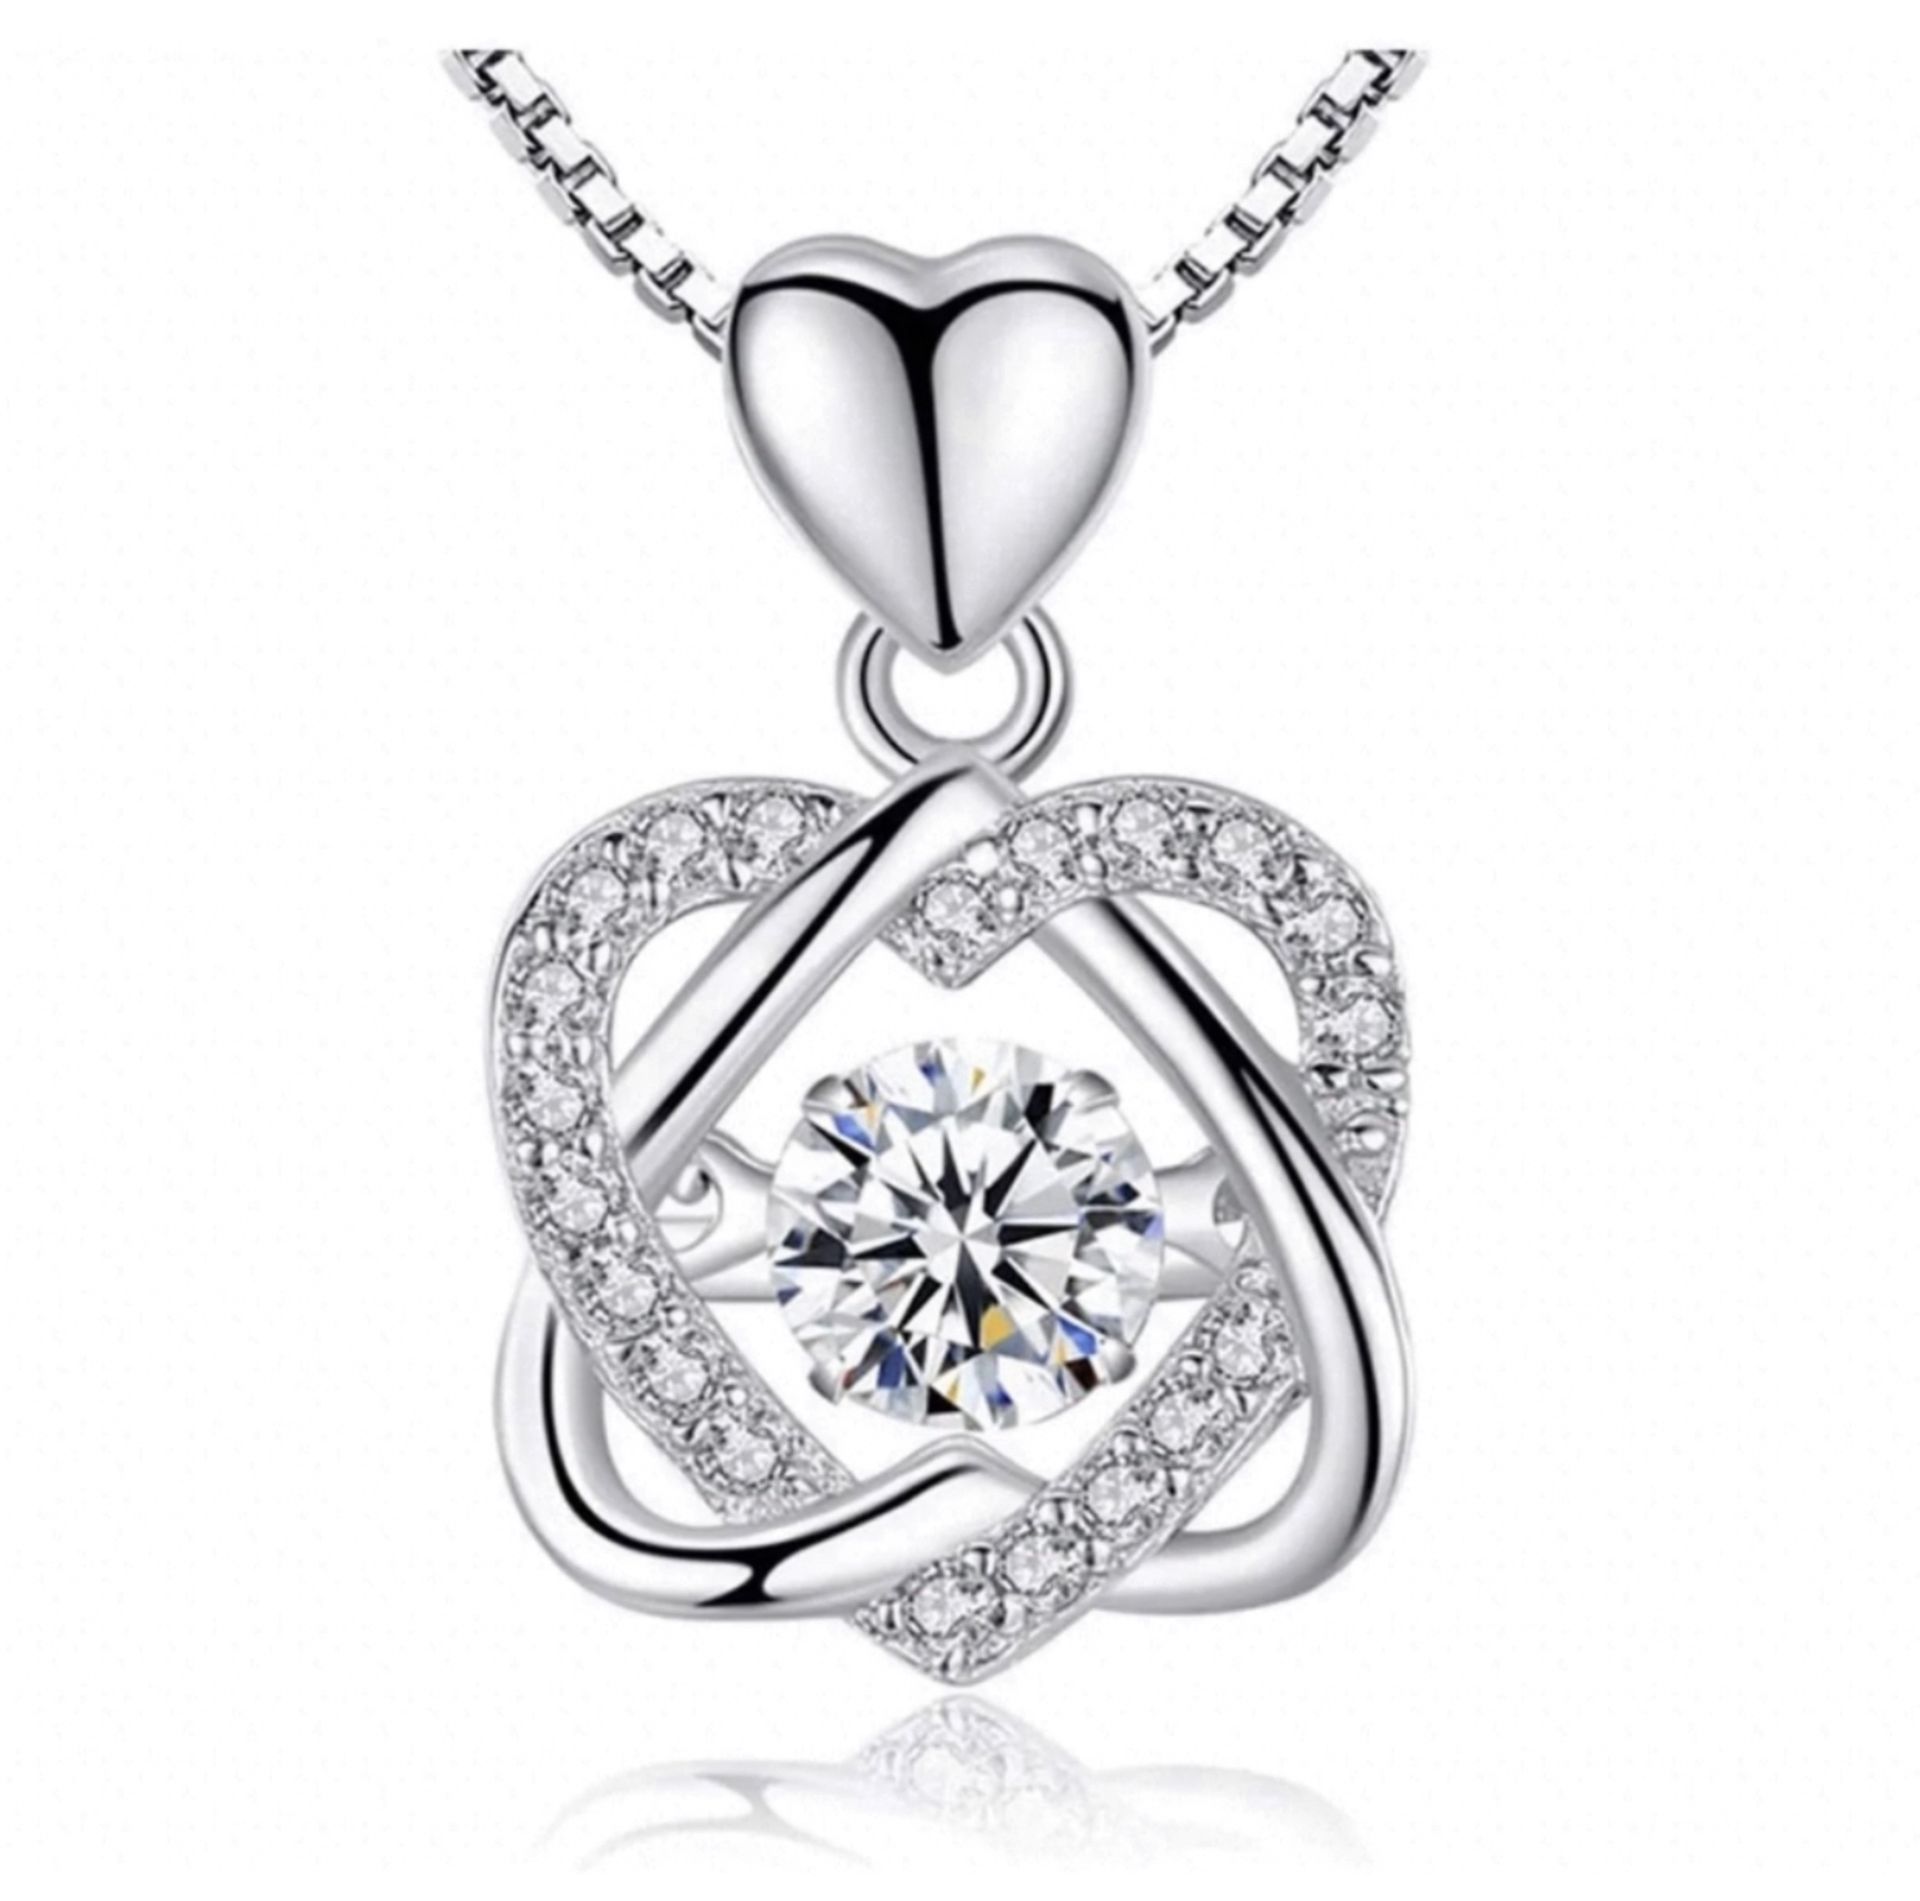 RRP £32.99 Selead 925 Silver Necklace Beating Stone Gift Pendant